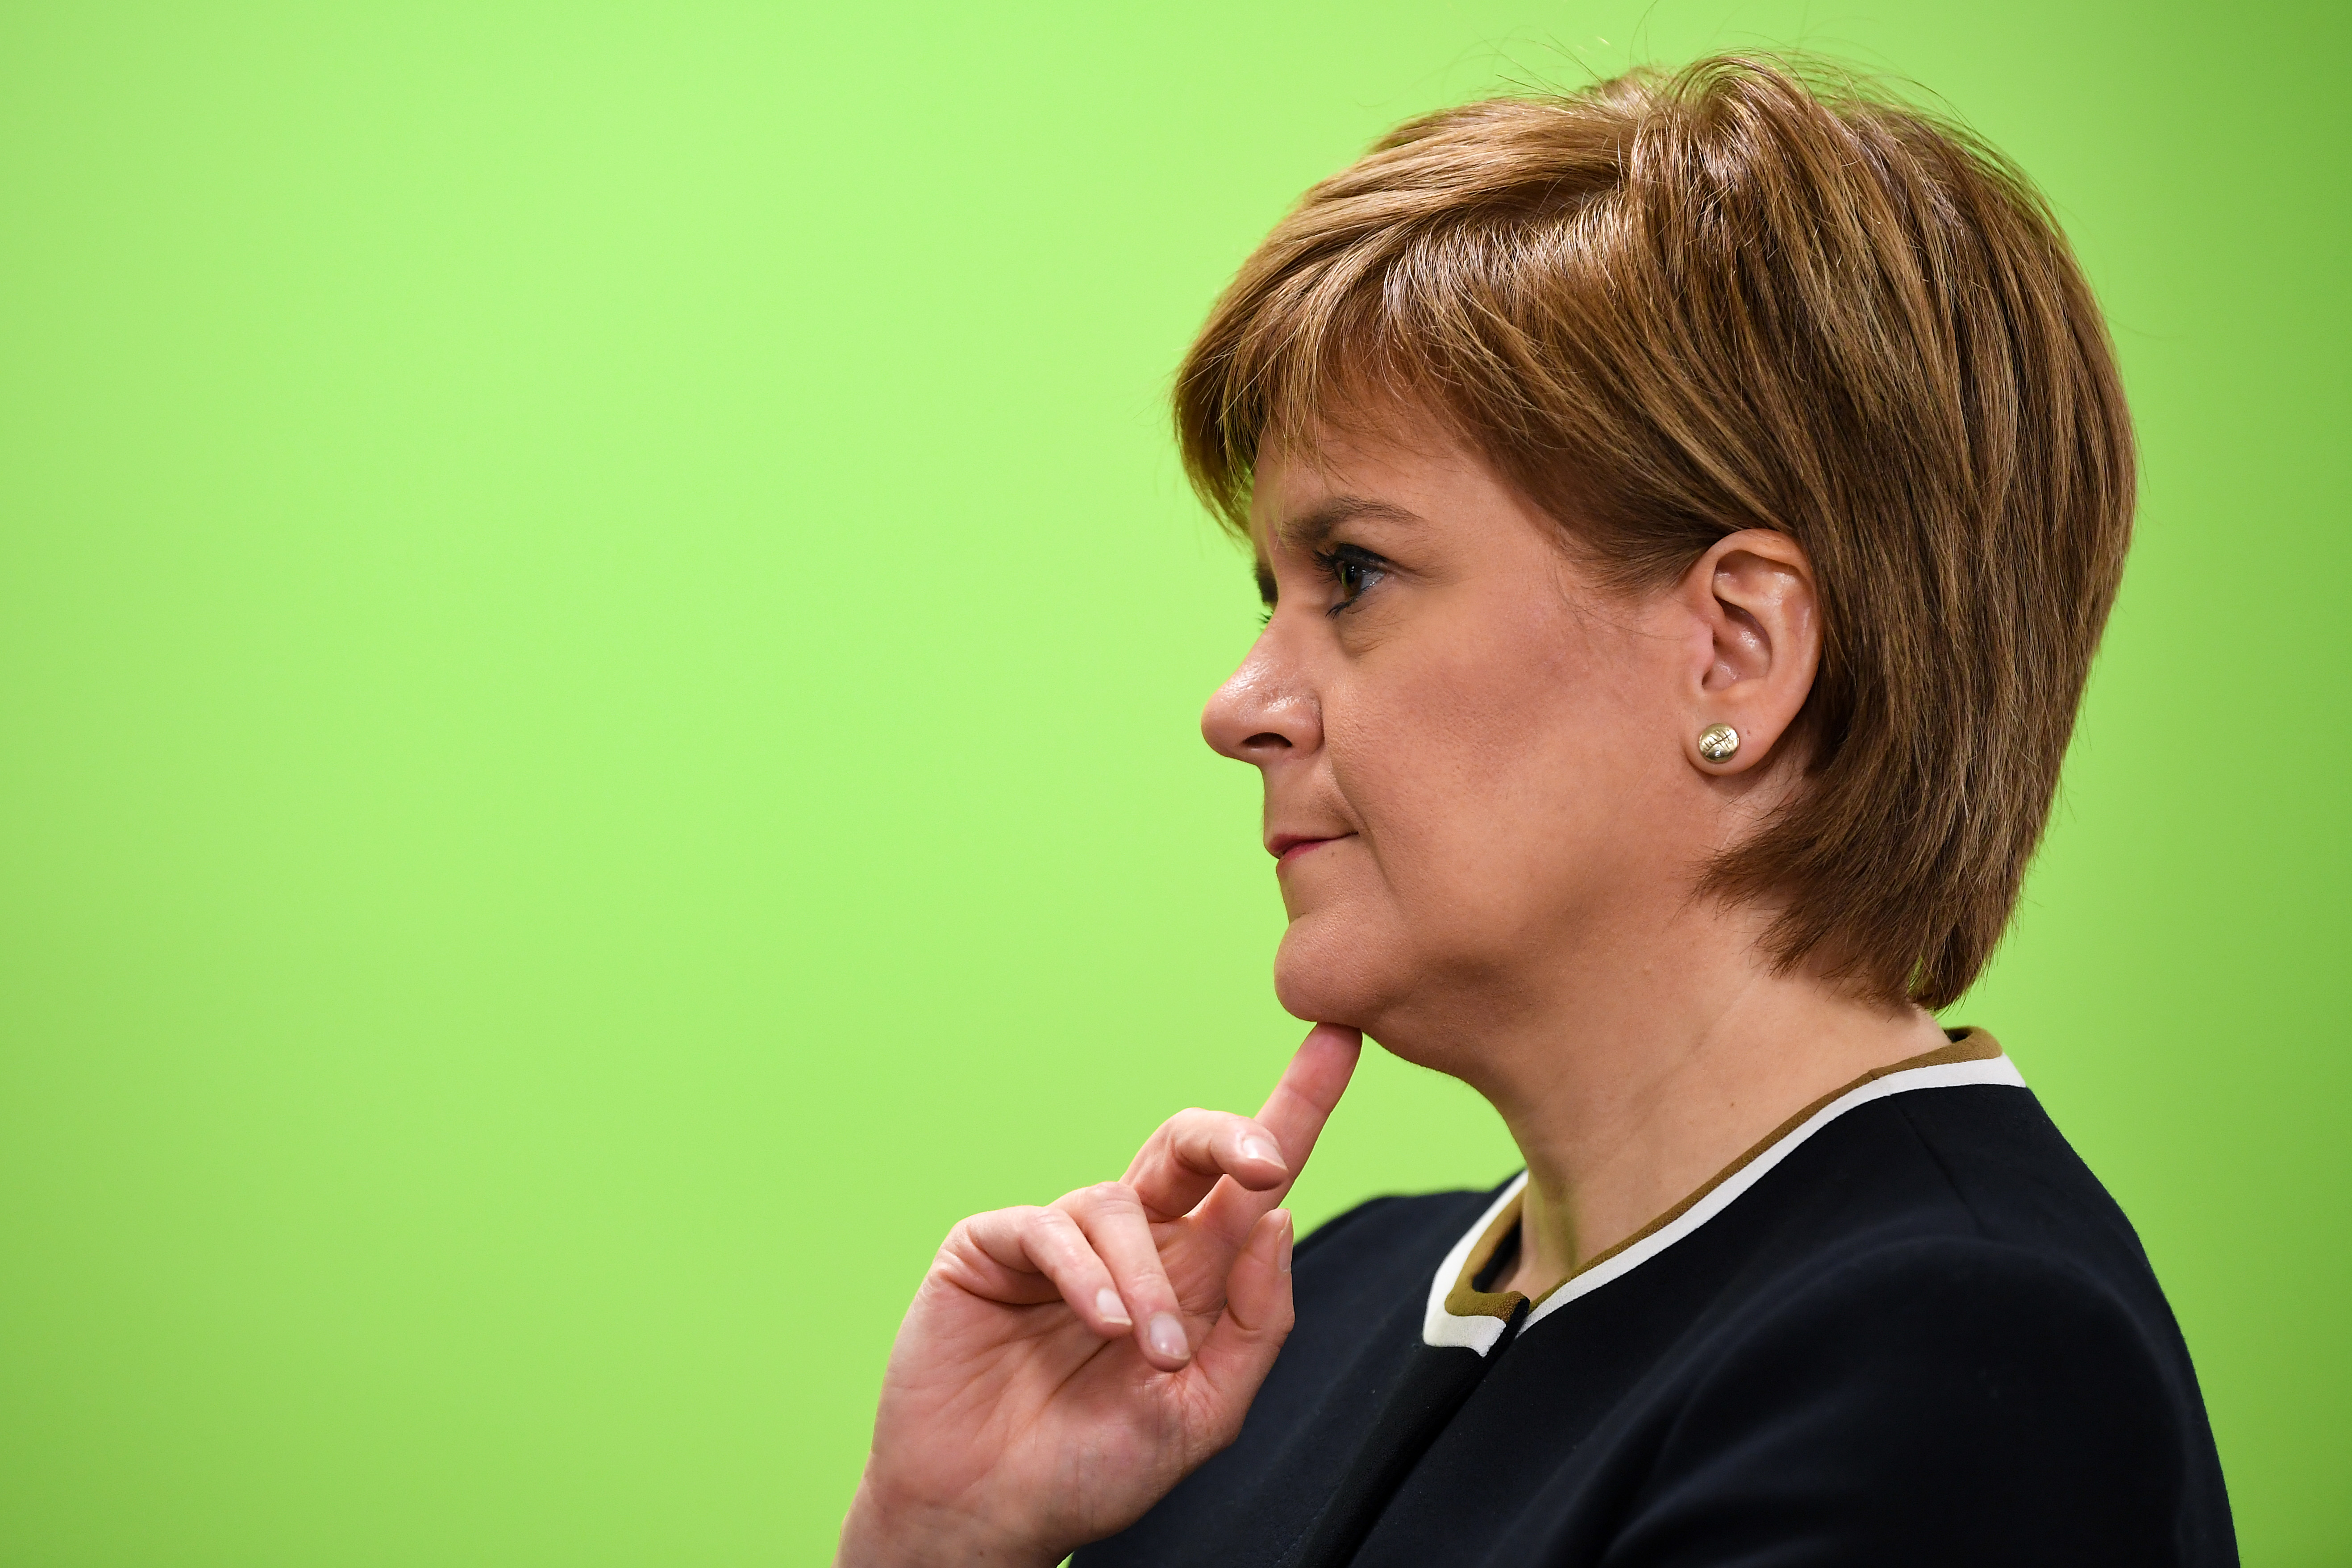 DUNDEE, SCOTLAND - NOVEMBER 19: First Minister Nicola Sturgeon, officially opens NHS Tayside Trauma Centre at Ninewells Hospital on November 19, 2018 in Dundee, Scotland. The Dundee unit is the second of four of Scotland’s new major trauma centres that will deal with the worst injuries suffered in Scotland. (Photo by Jeff J Mitchell - Pool / Getty Images)